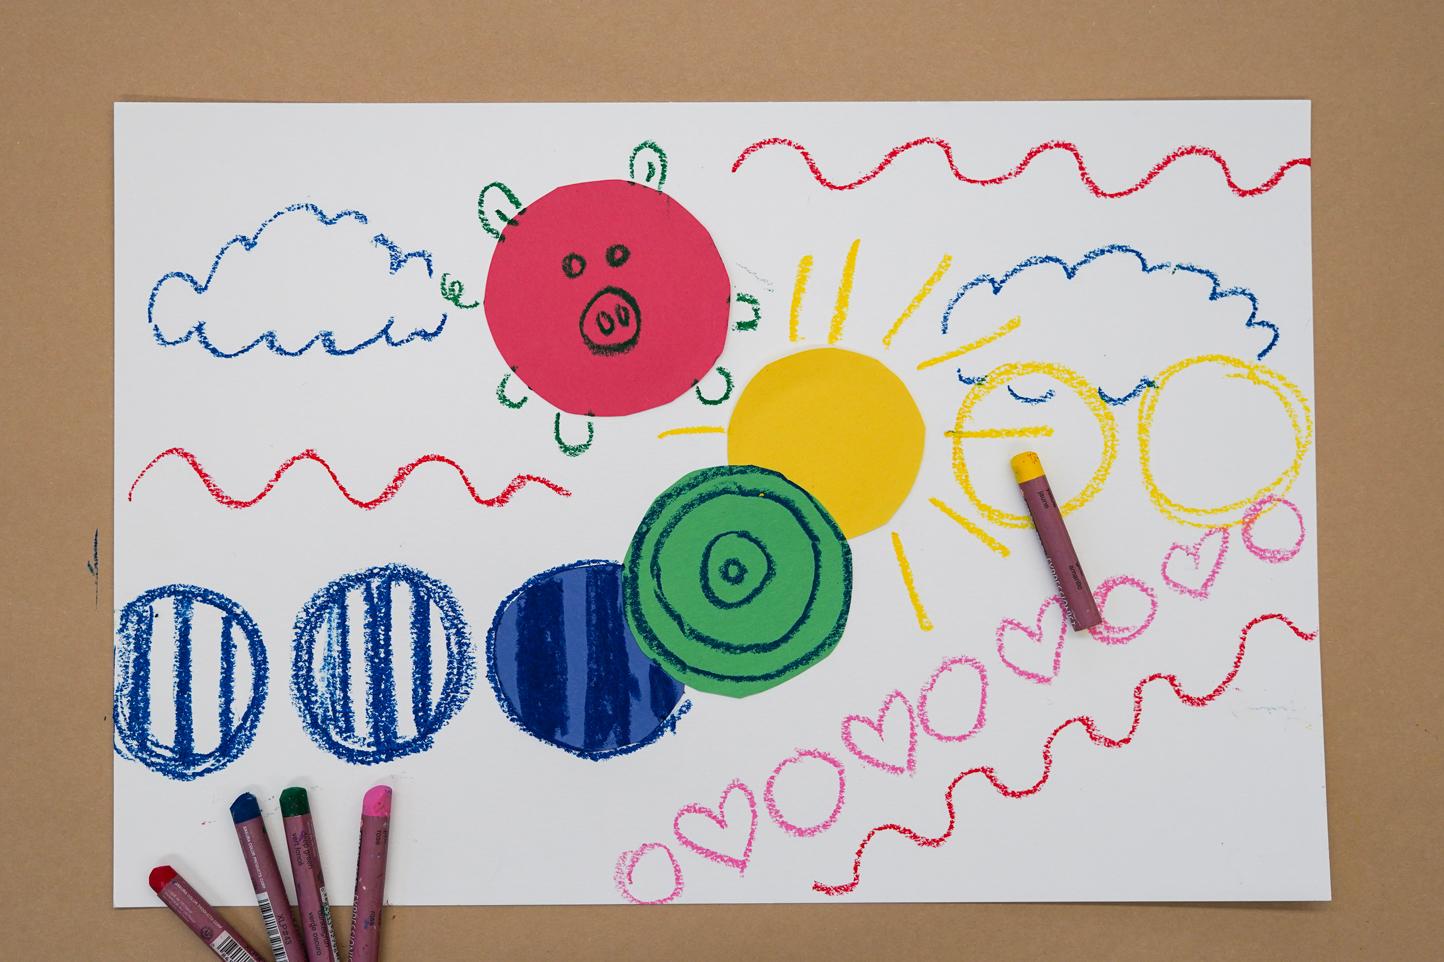 Photo of a piece of paper with circles of colorful construction paper on it and doodles in many colors